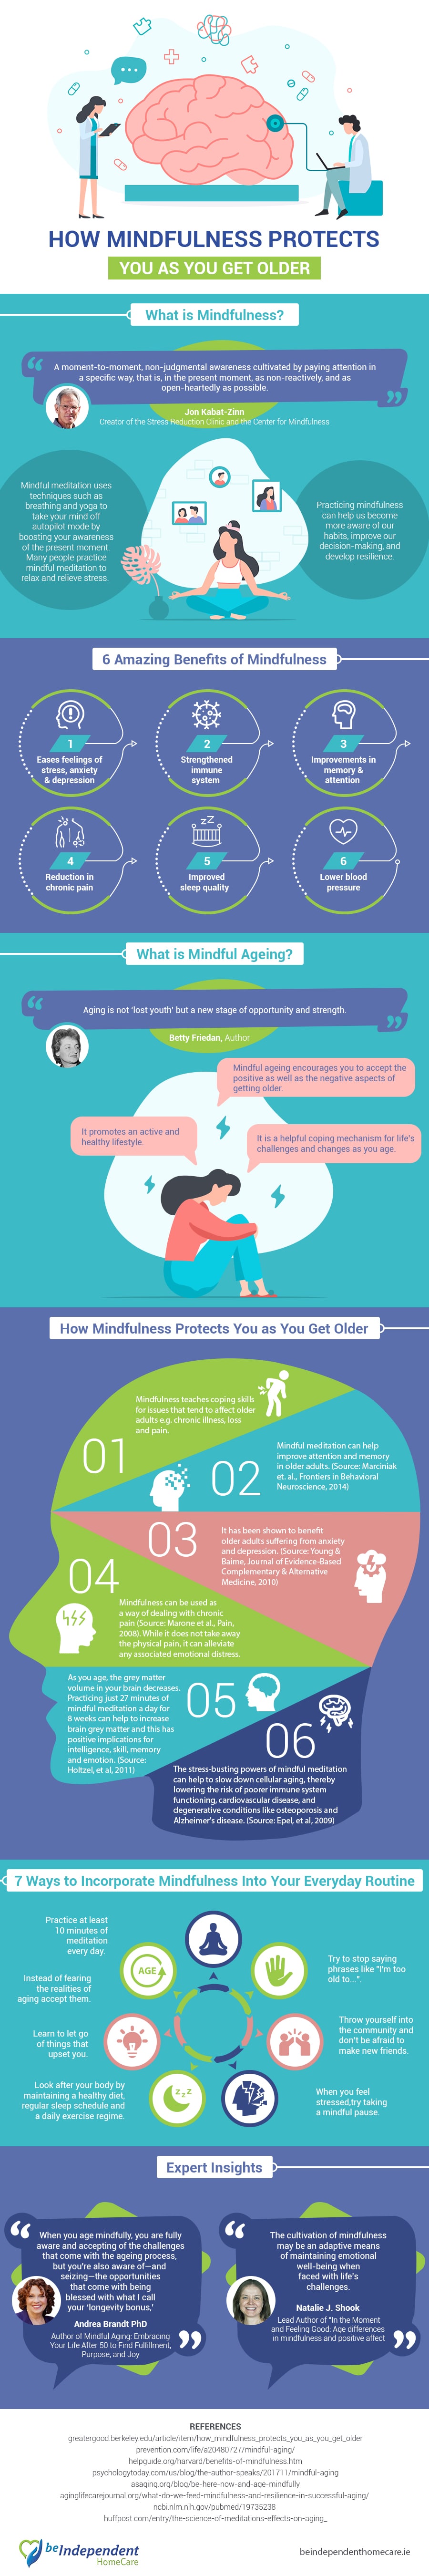 How Mindfulness Protects You as You Get Older (Infographic)